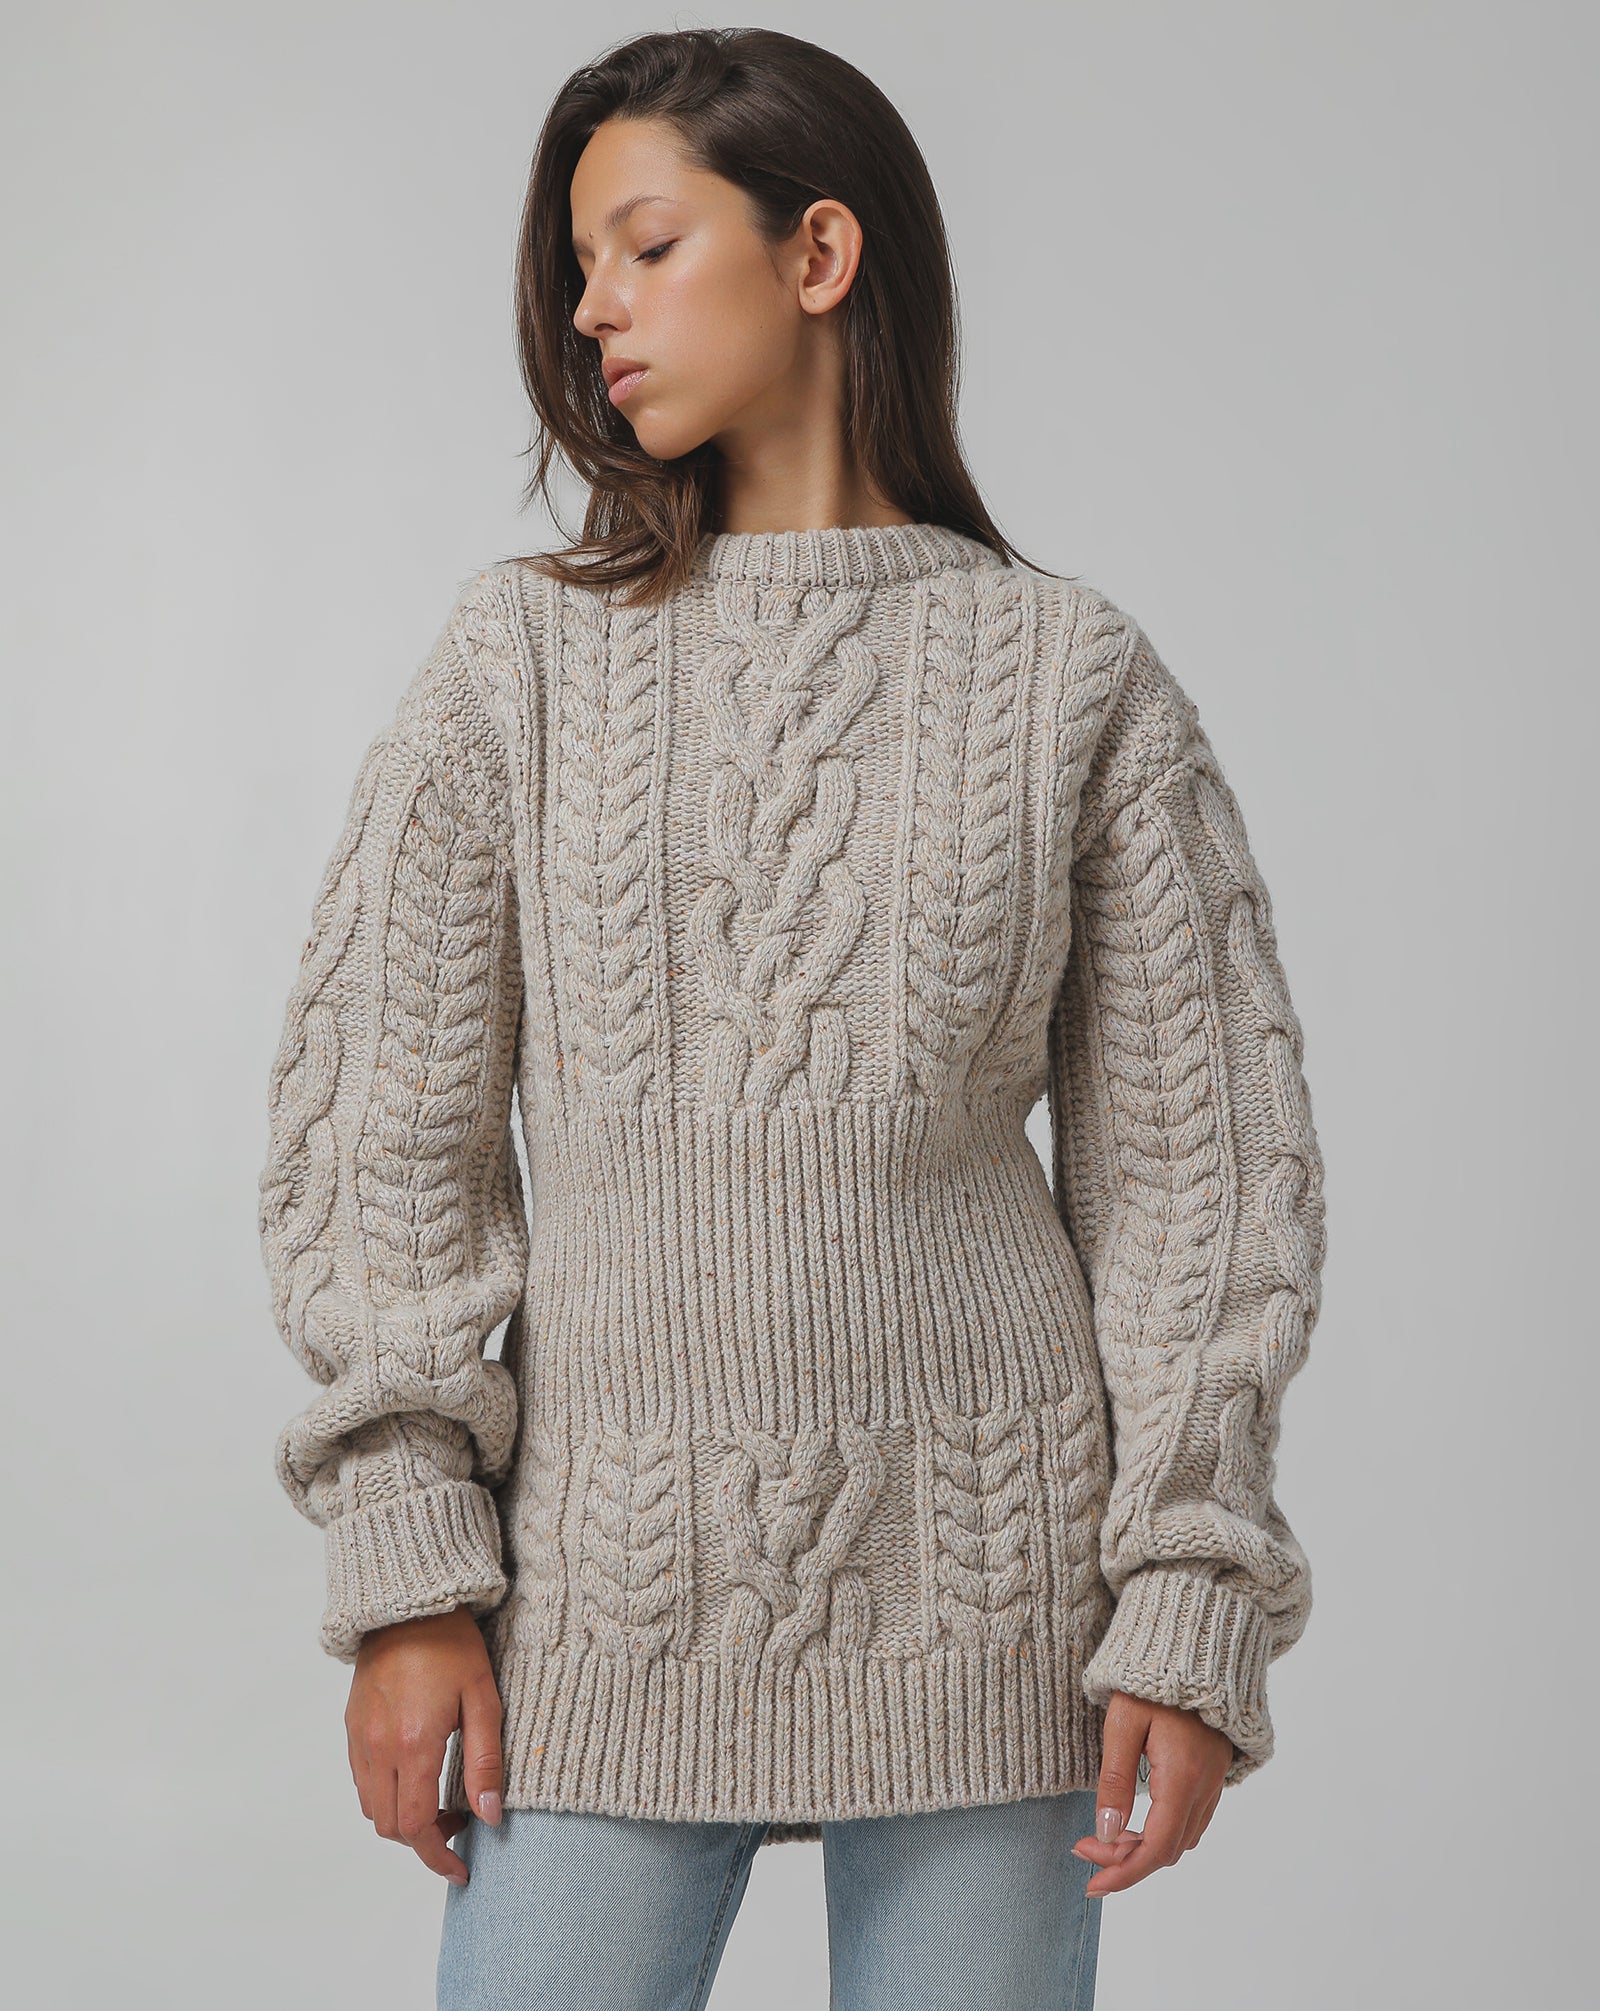 Sweater by Low Classic